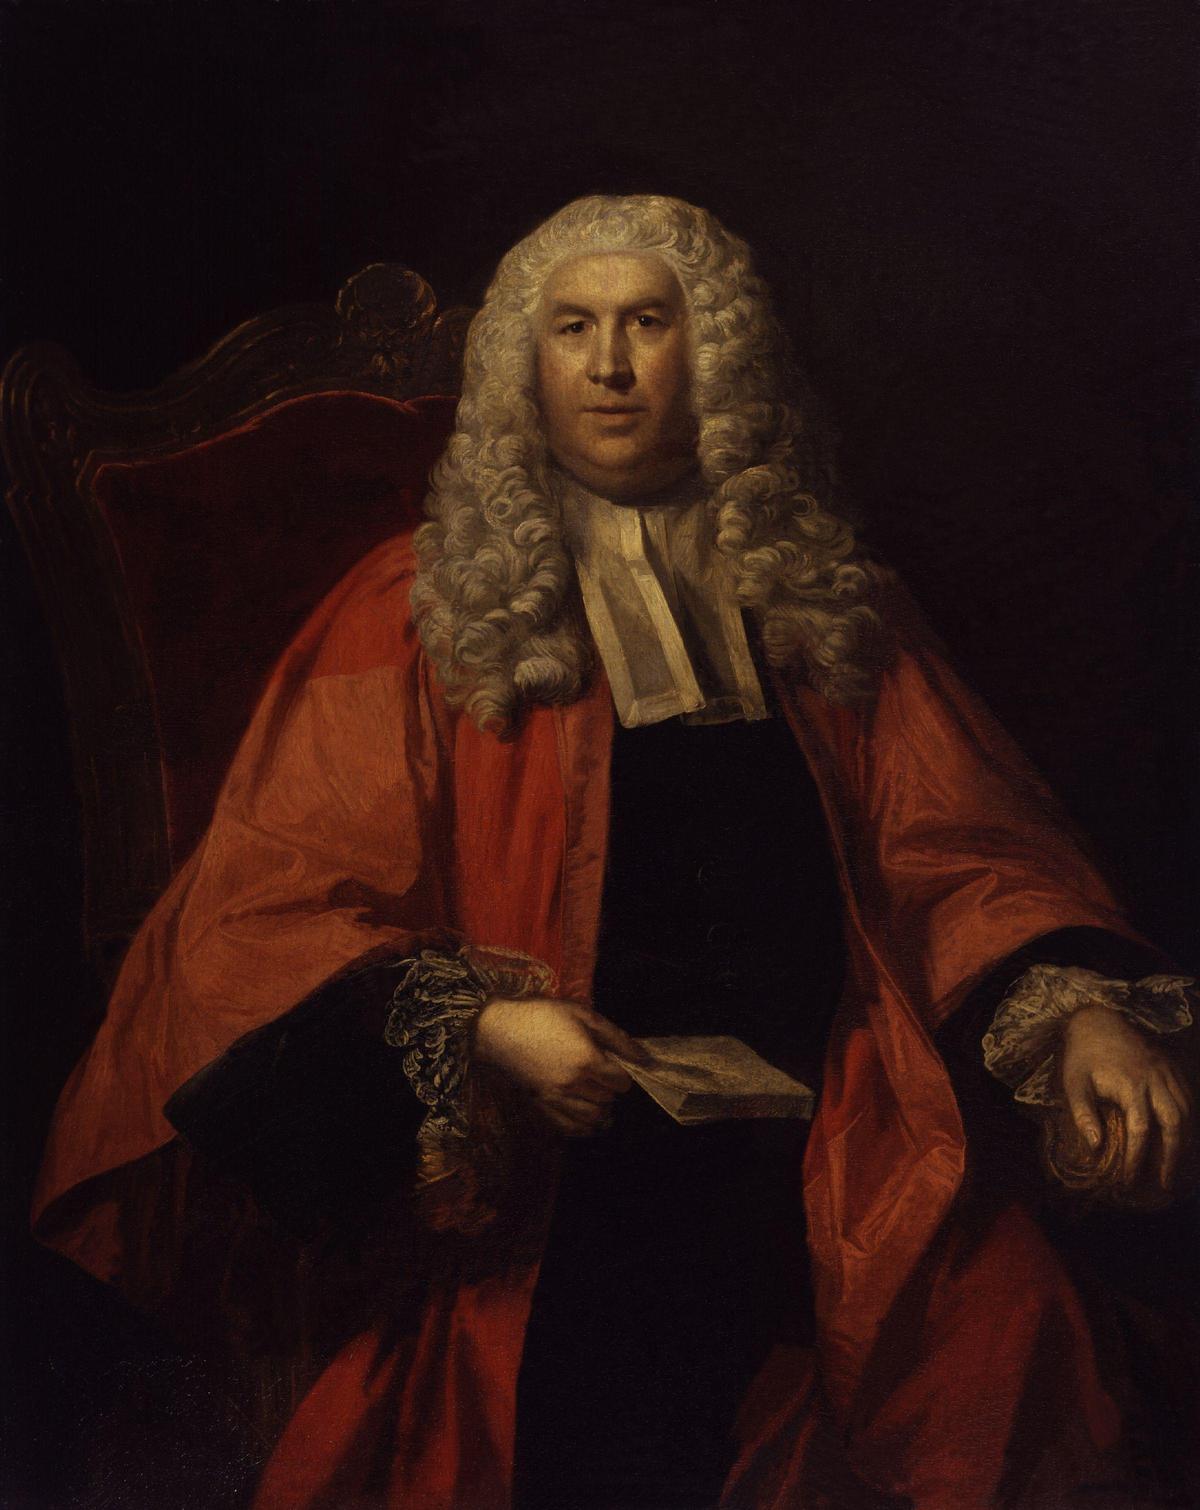 Sir William Blackstone by an unknown painter (circa 1755). (<a href="https://commons.wikimedia.org/wiki/File:Sir_William_Blackstone_from_NPG.jpg">Public Domain</a>)